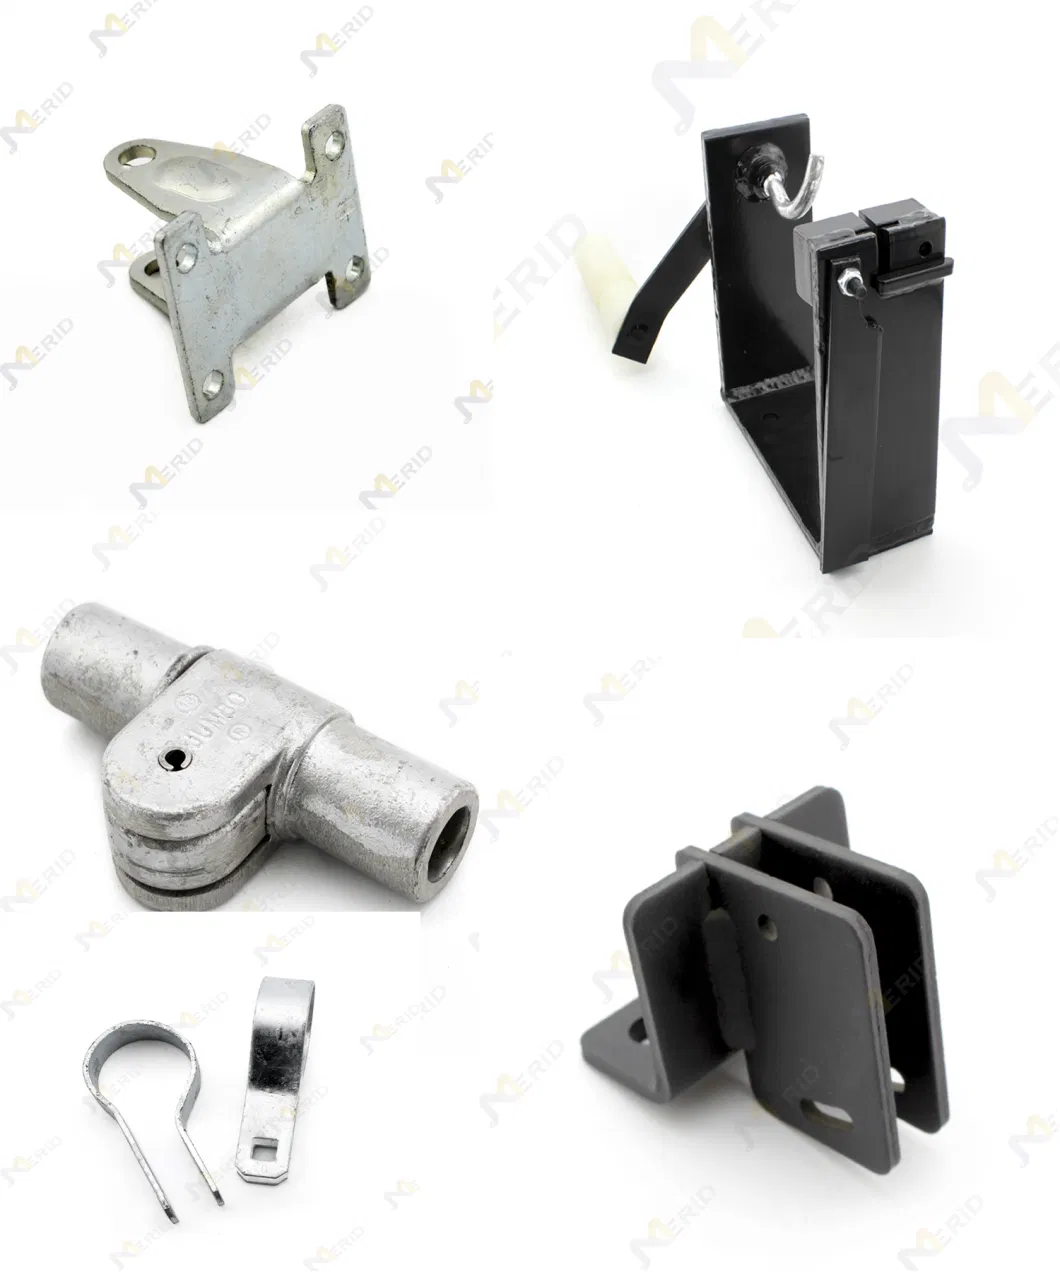 Professional Manufacturer Customizable Stainless Steel Stamping Accessories